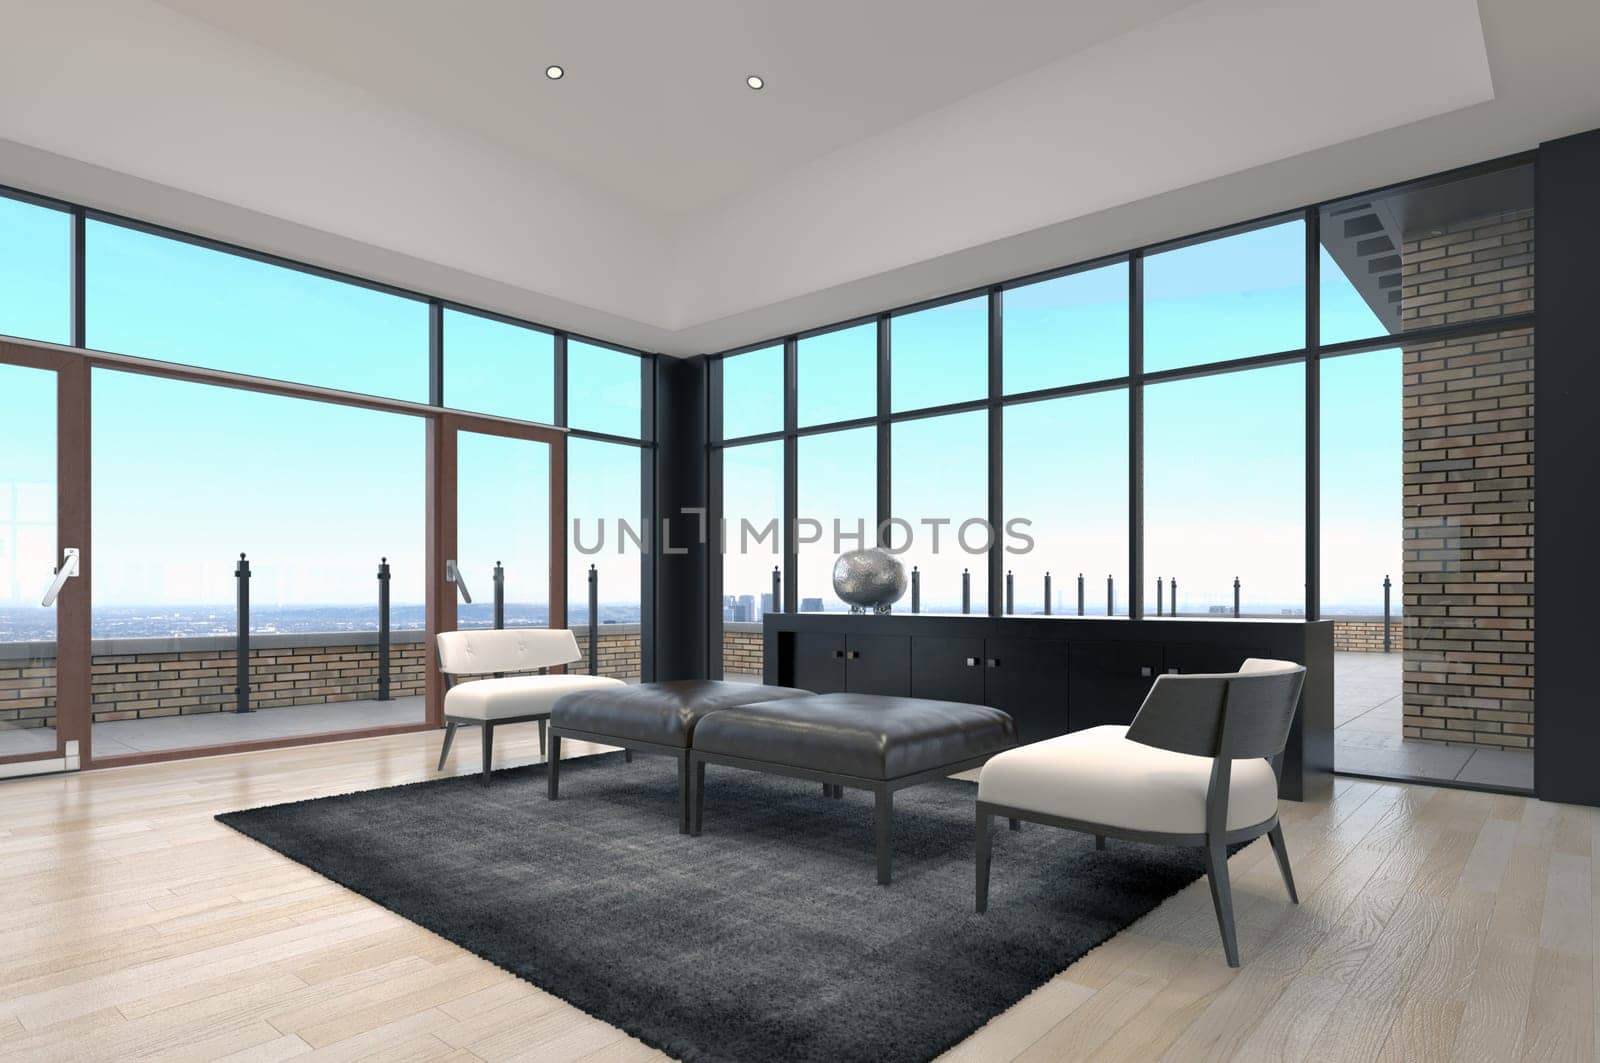 Modern bright interiors 3D rendering illustration of living room with sea view